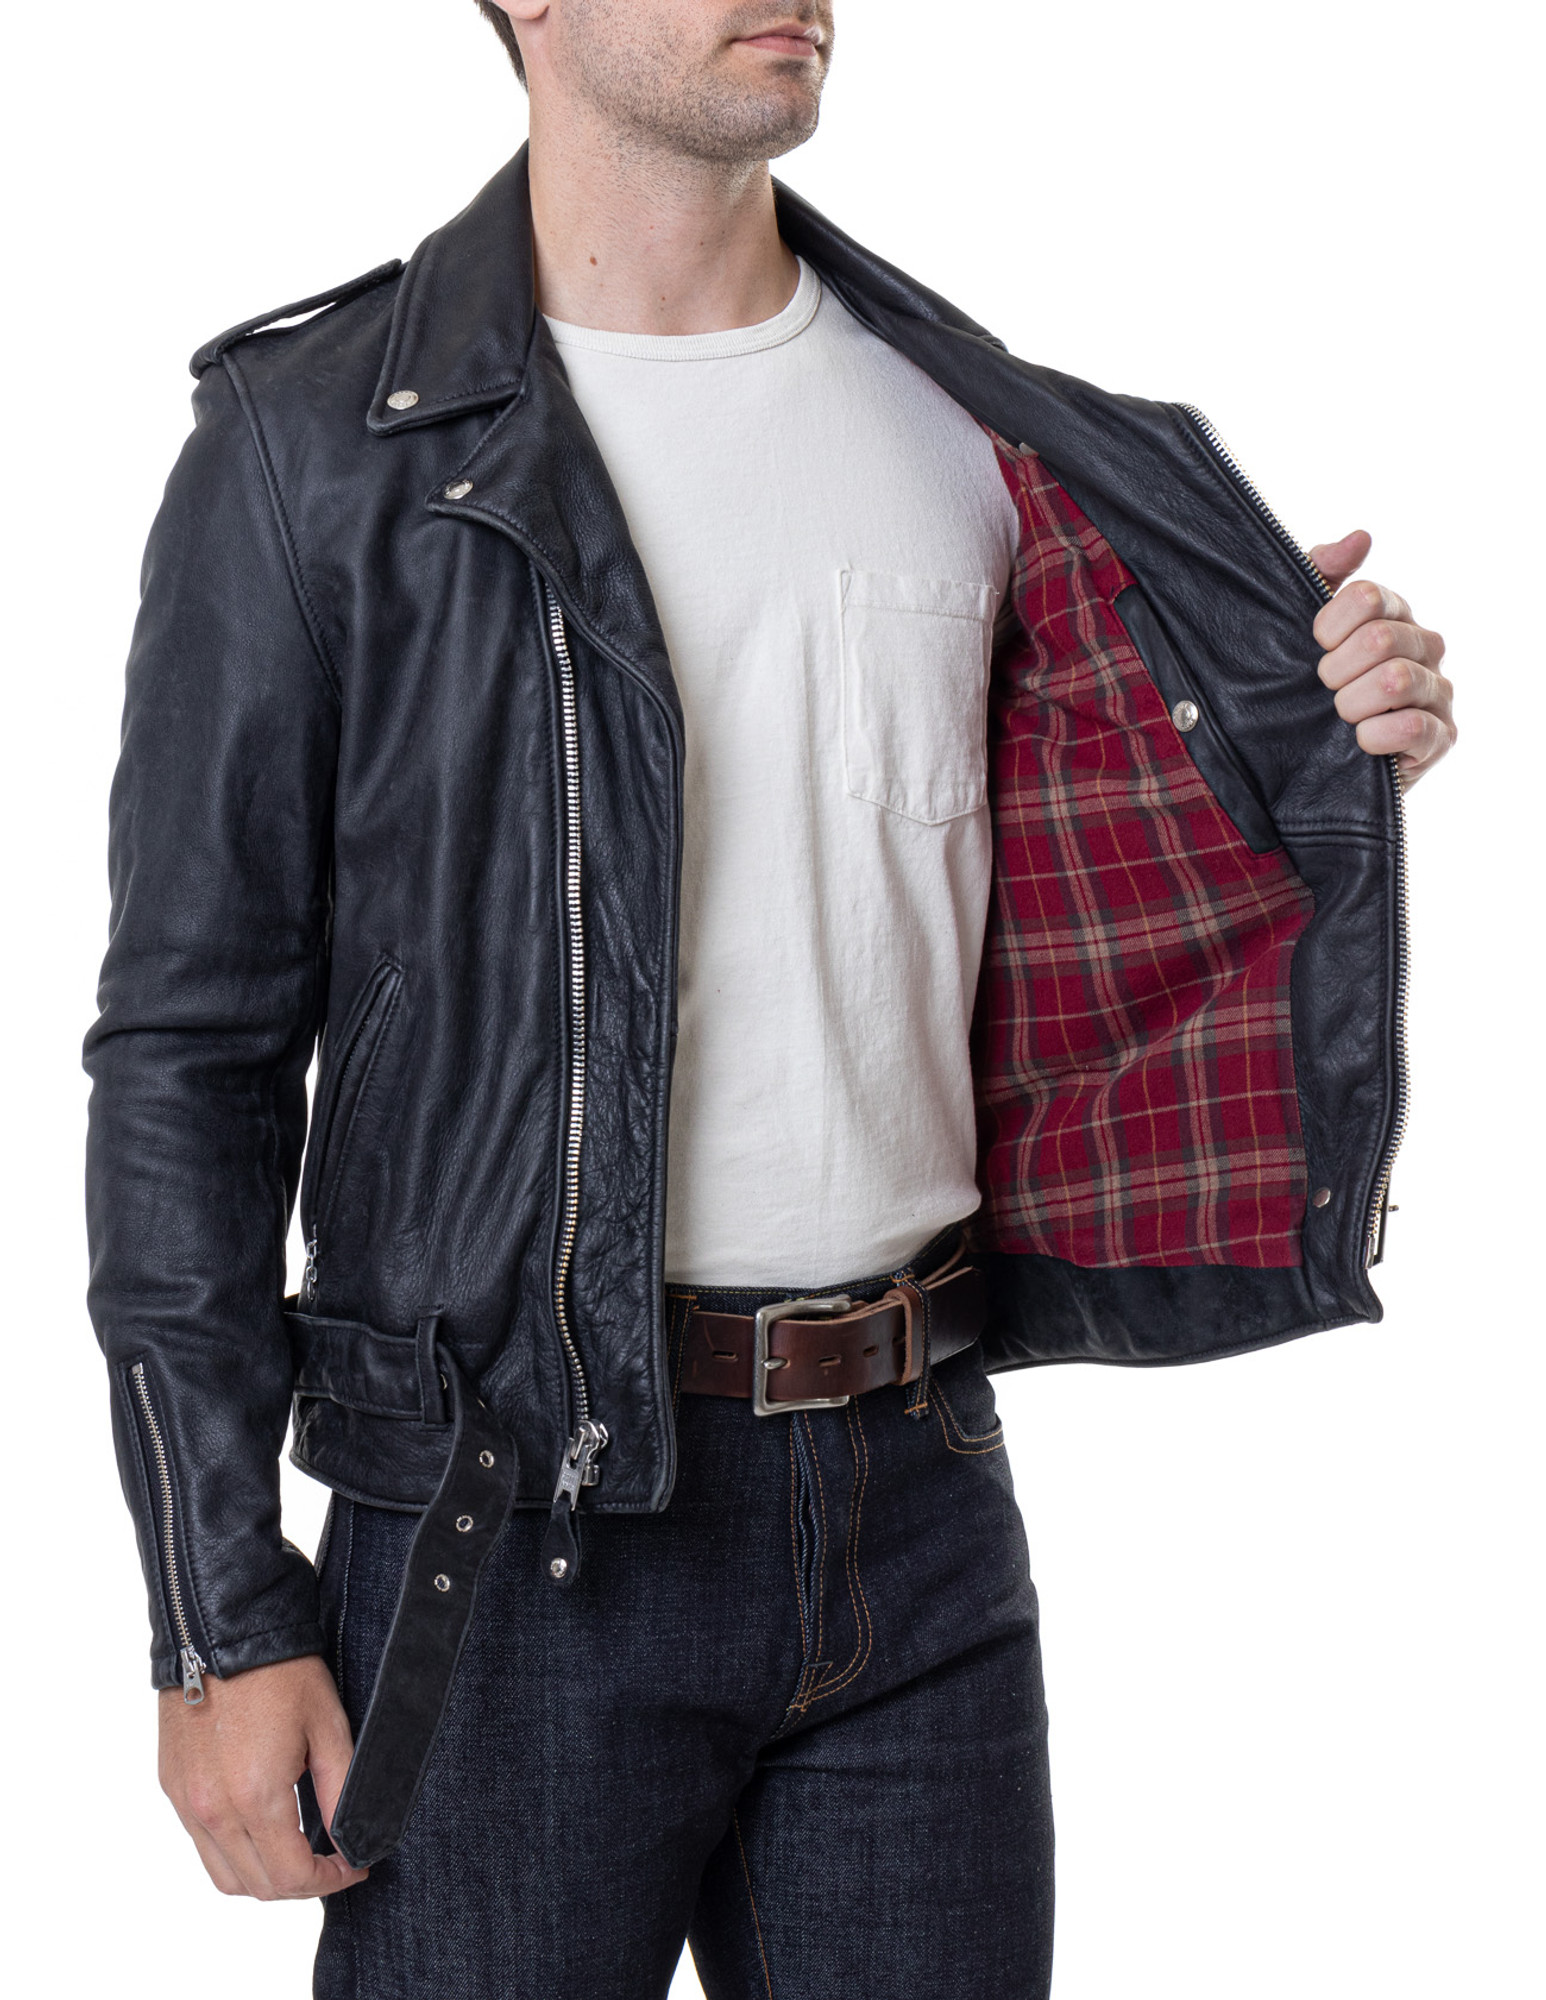 Distorted Motocycle Leather Jacket - Ready-to-Wear 1AB96S